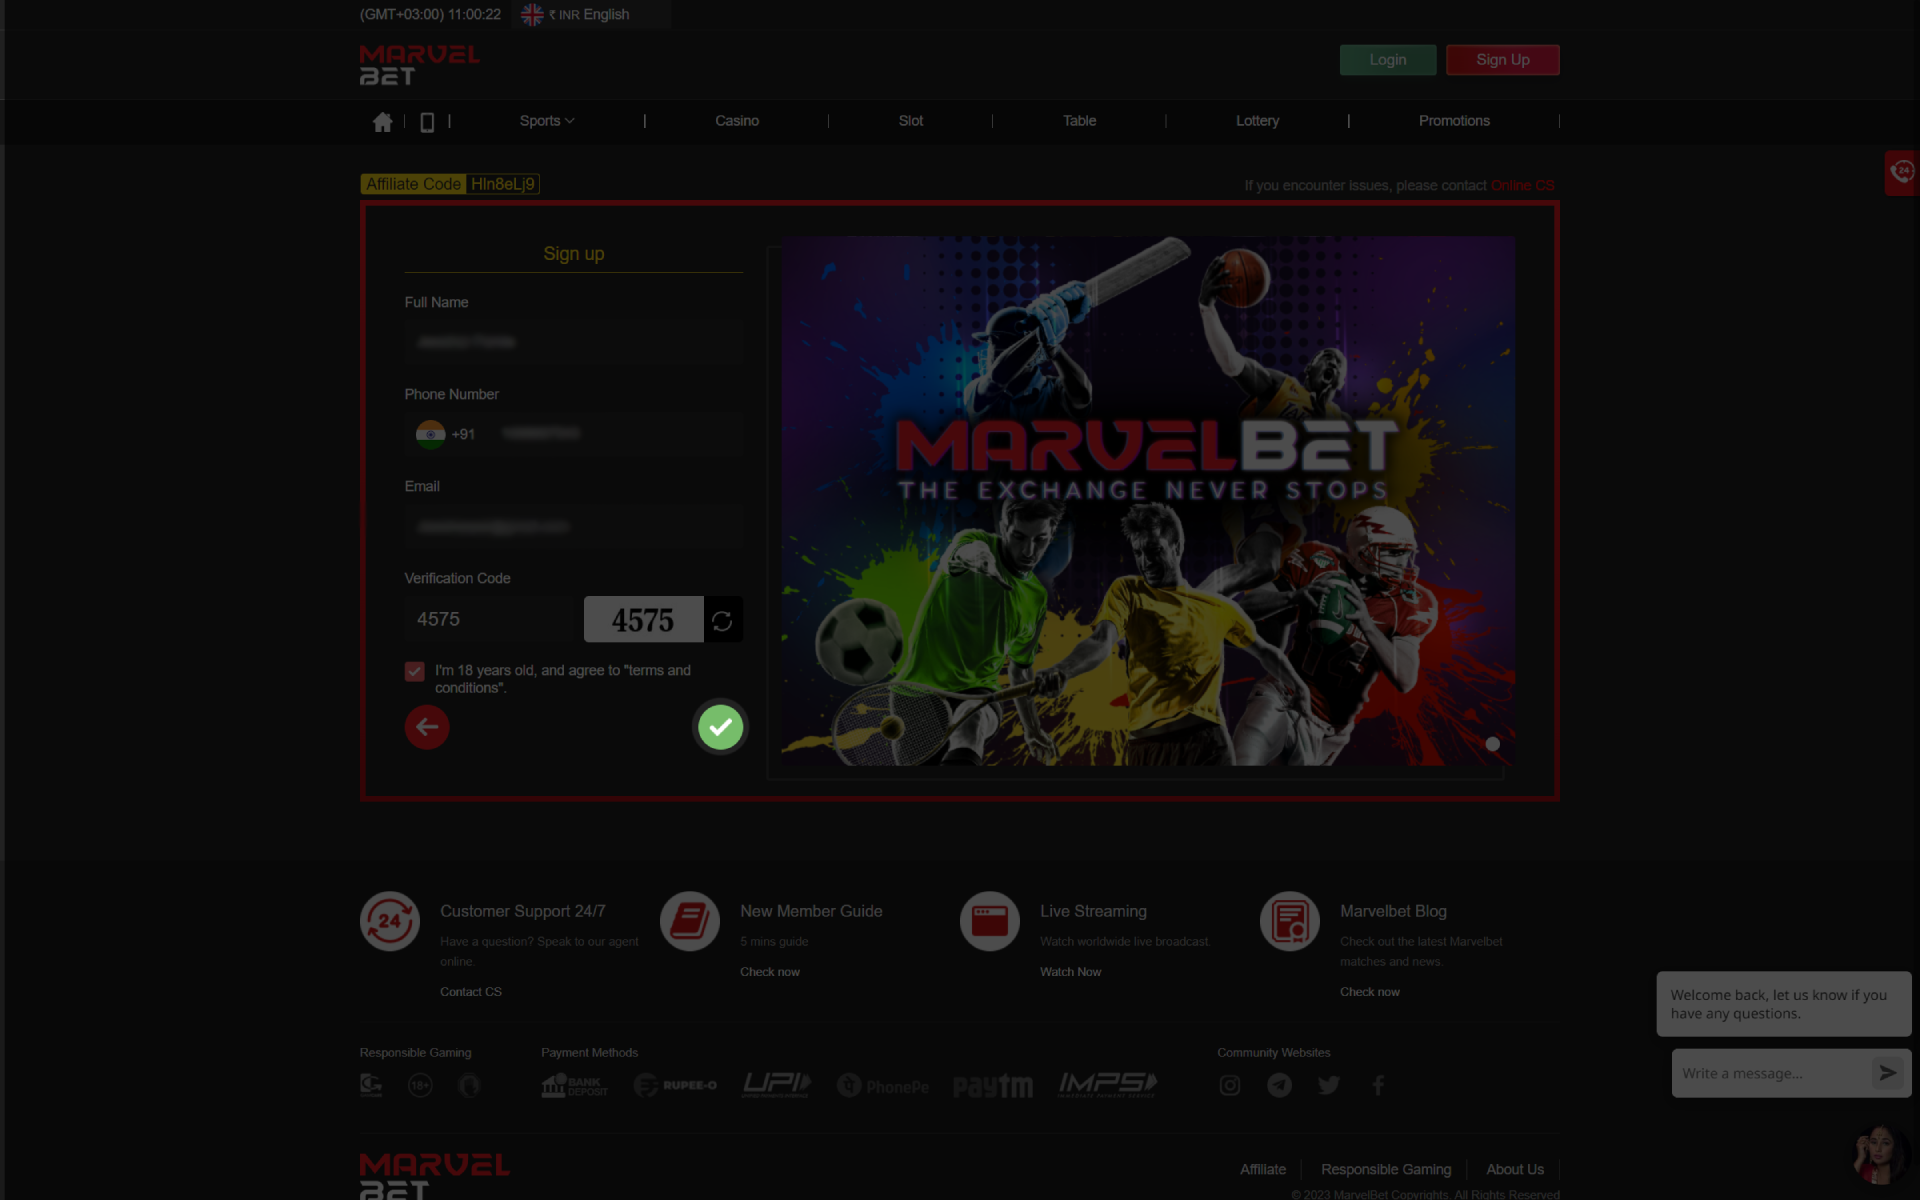 Confirm the correctness of the data and go on to Marvelbet.